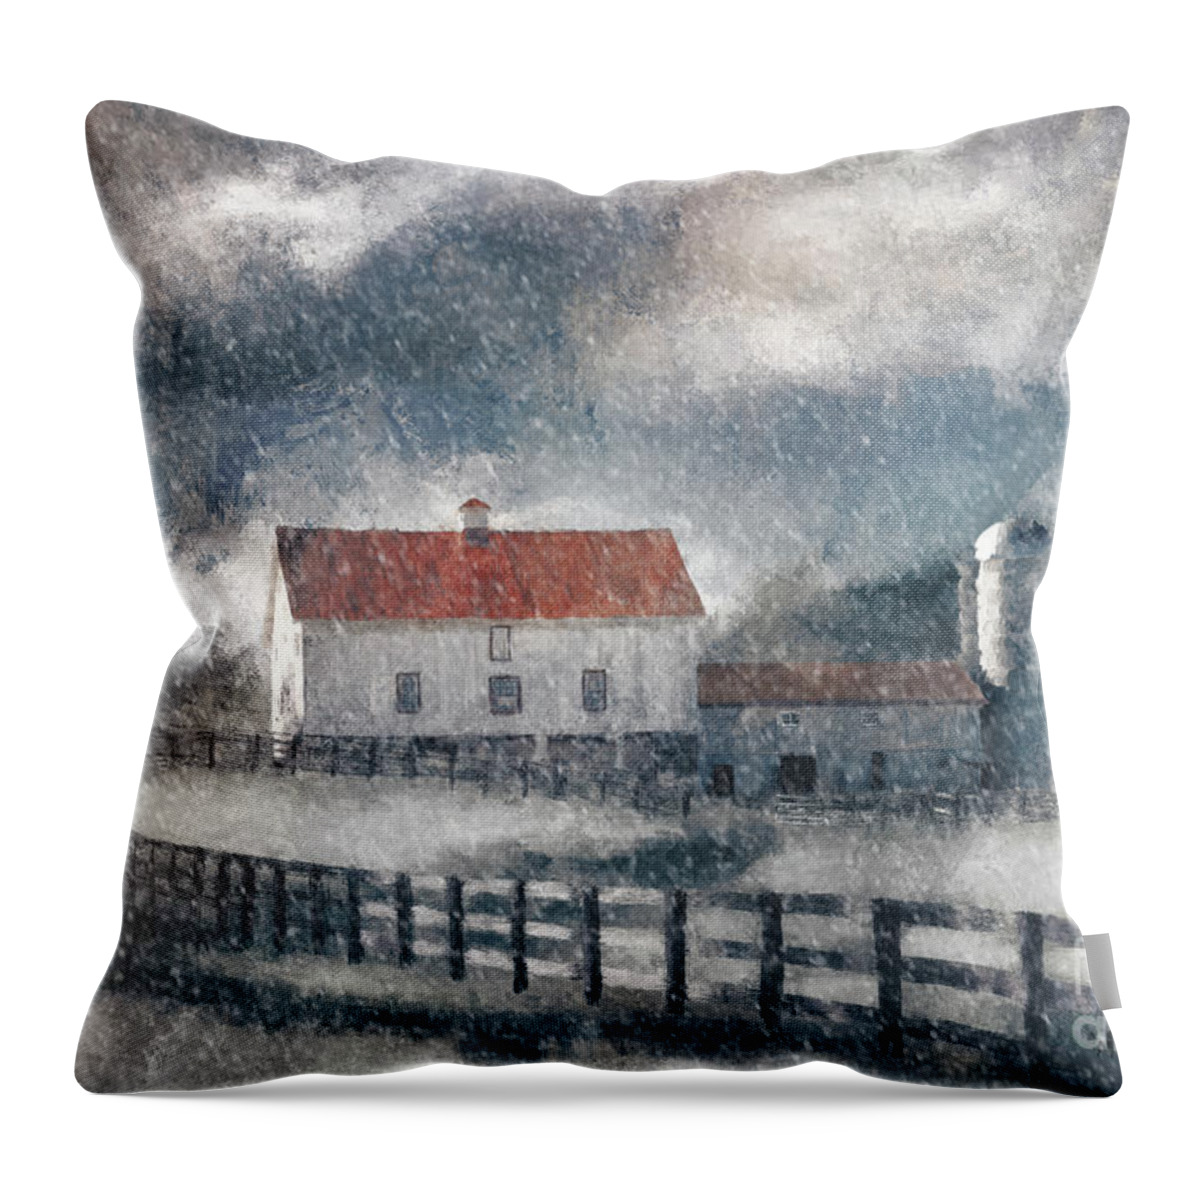 Barn Throw Pillow featuring the digital art Red Roof Barn In Winter by Lois Bryan